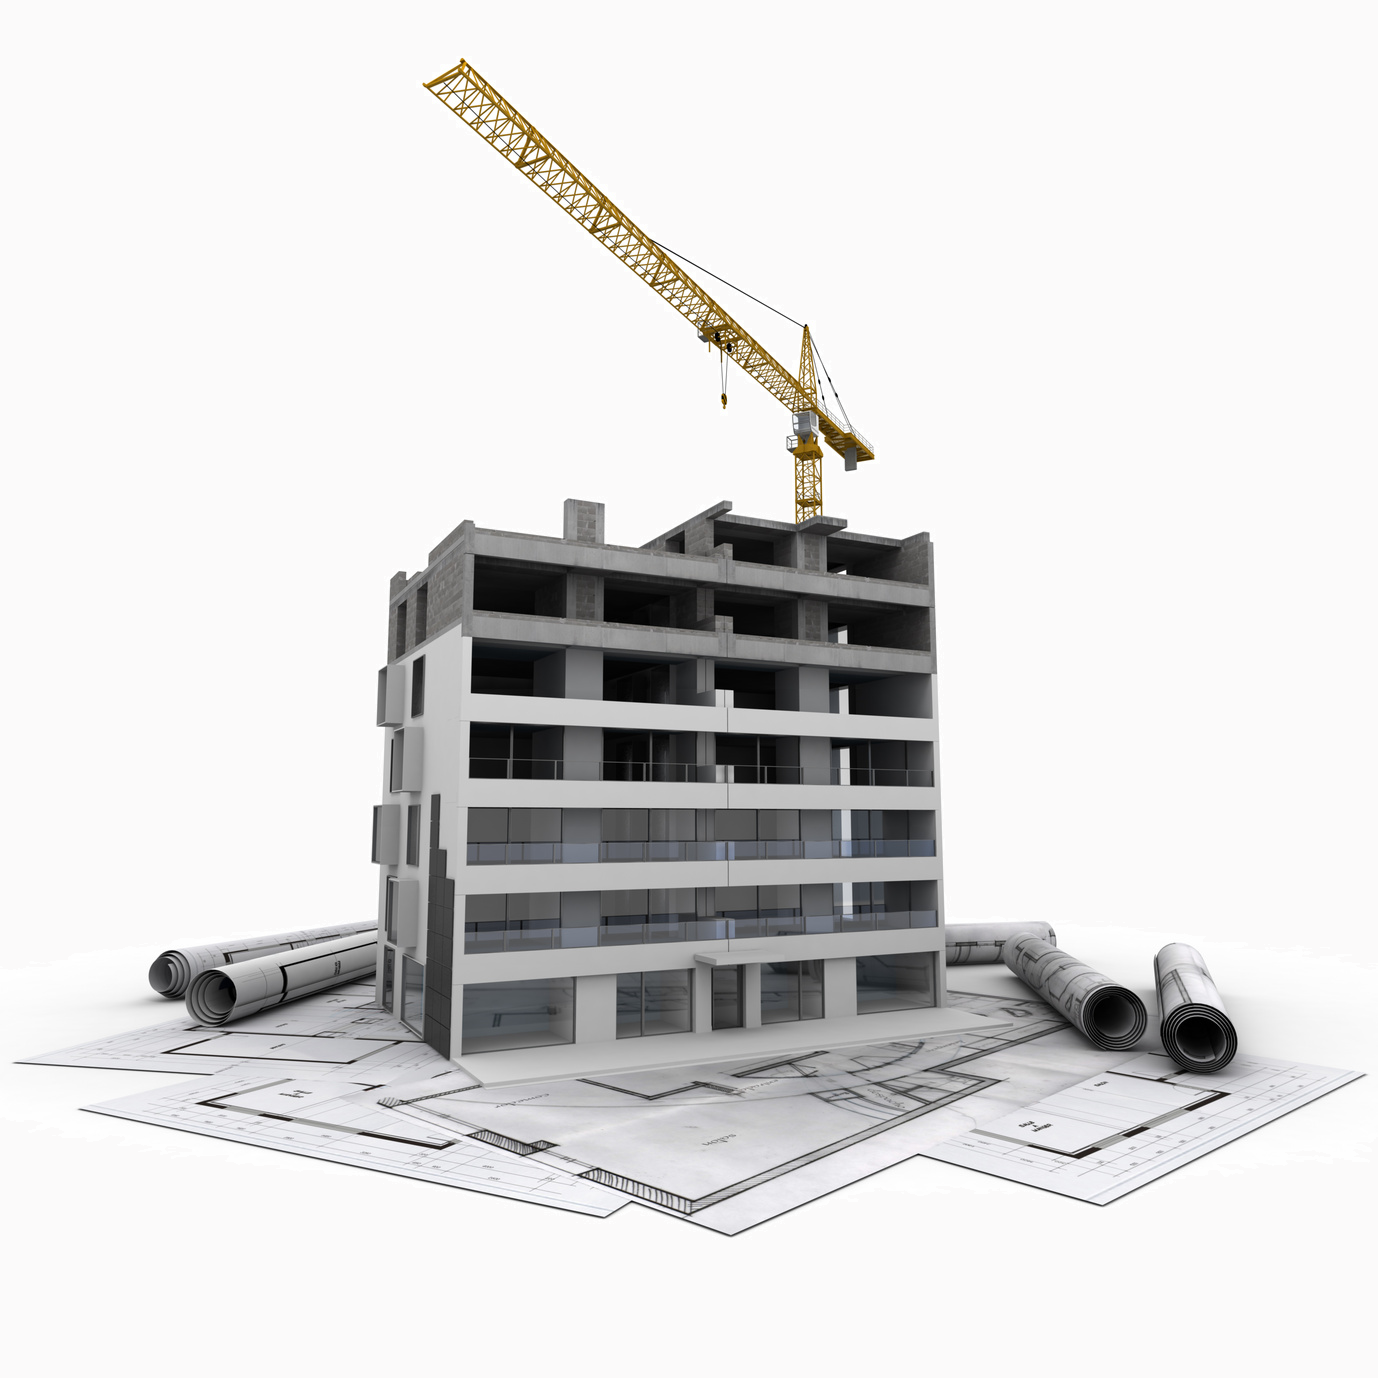 cost calculation tool for quantity surveyors and real estate investors